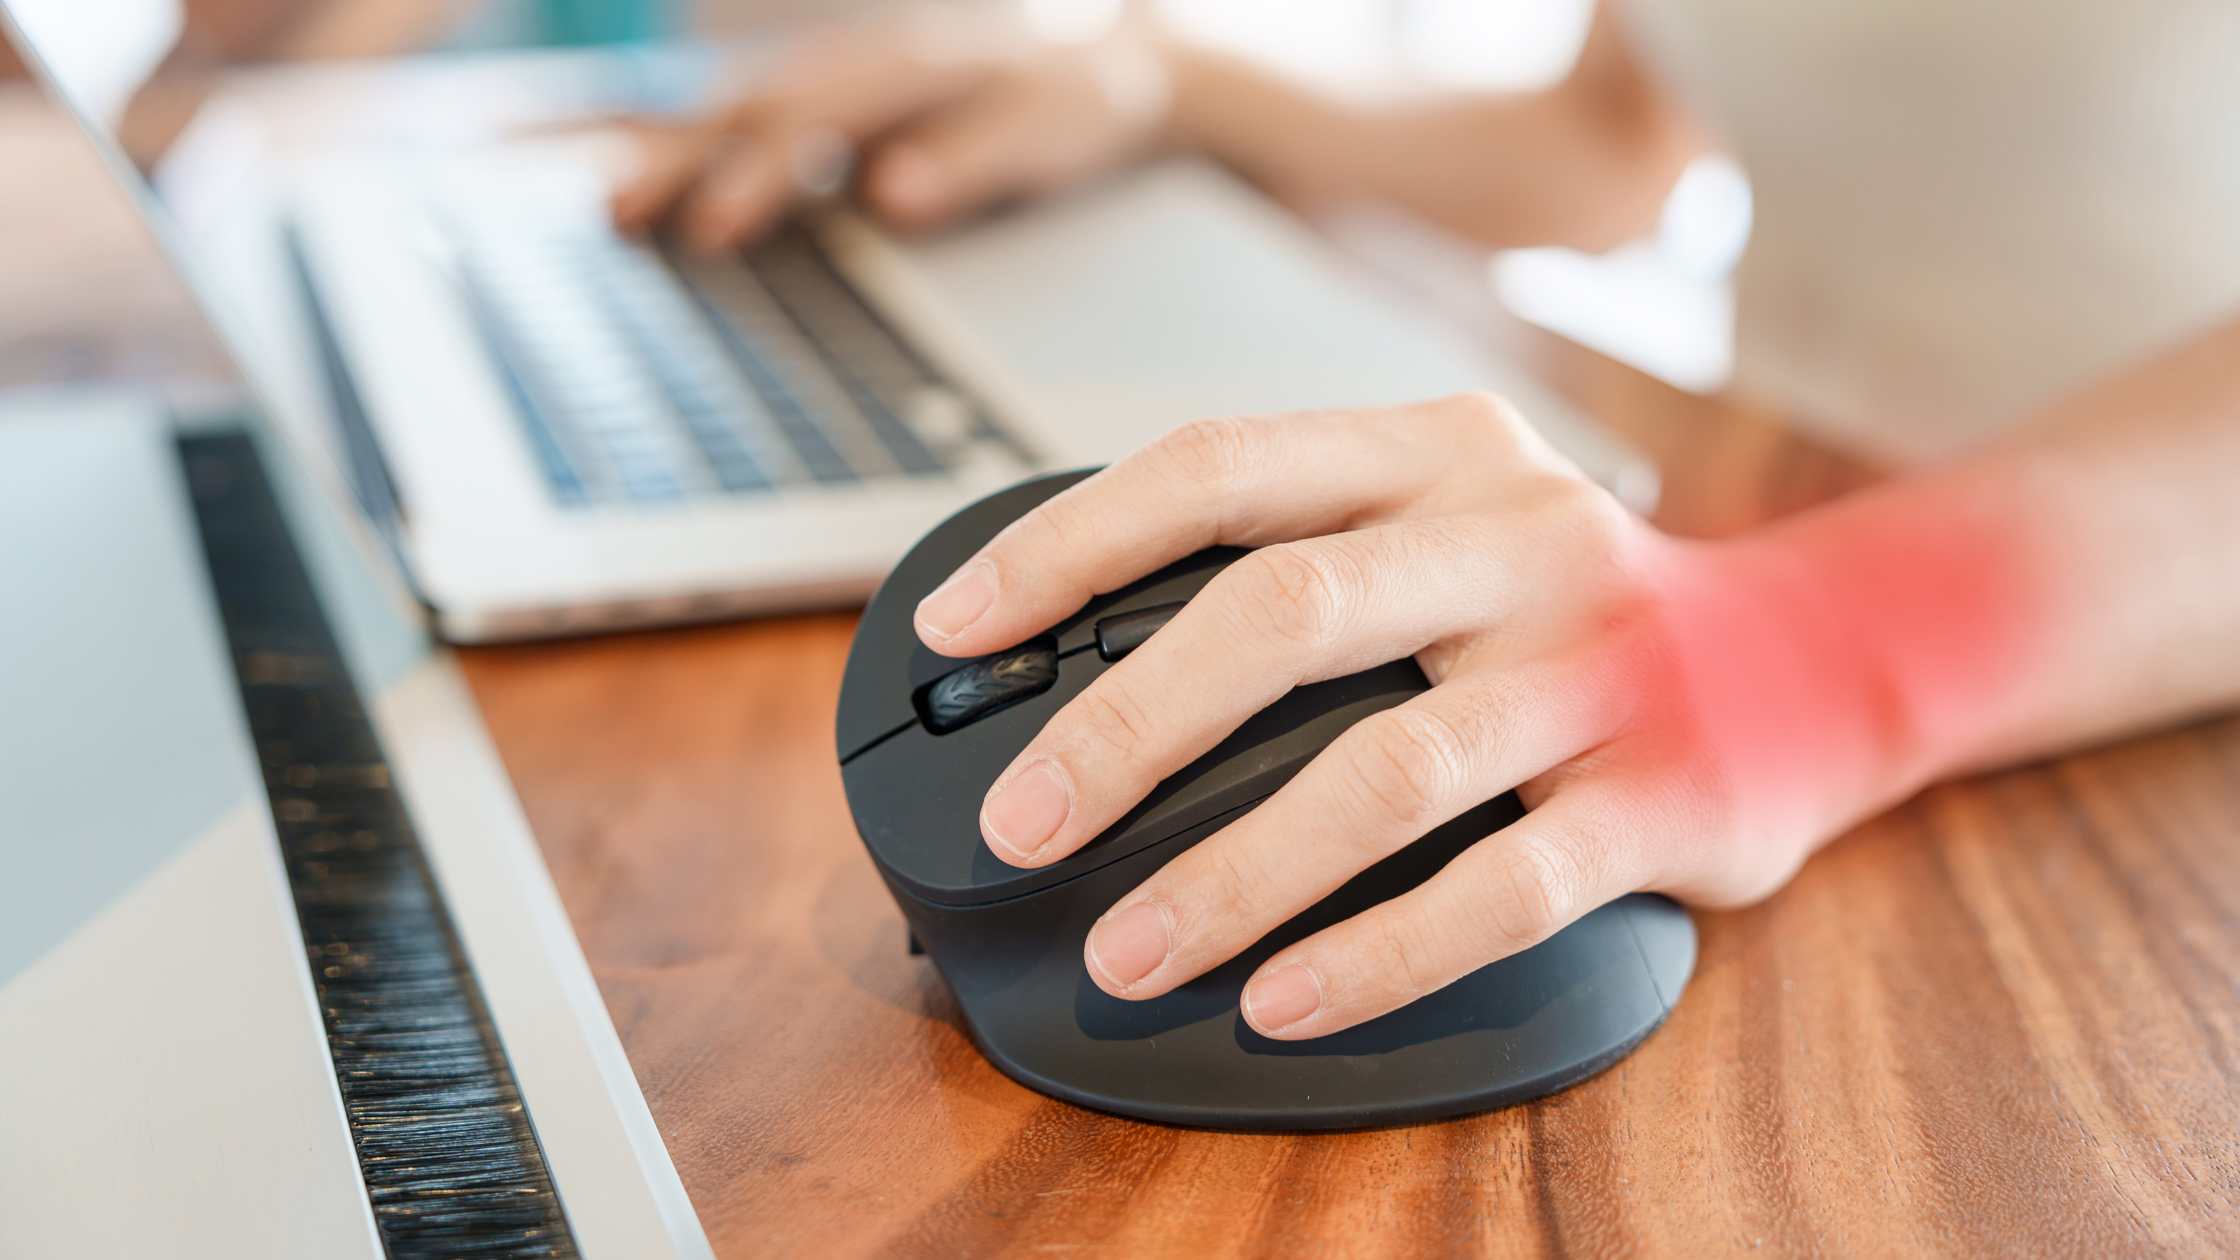 Preventing Carpal Tunnel Syndrome